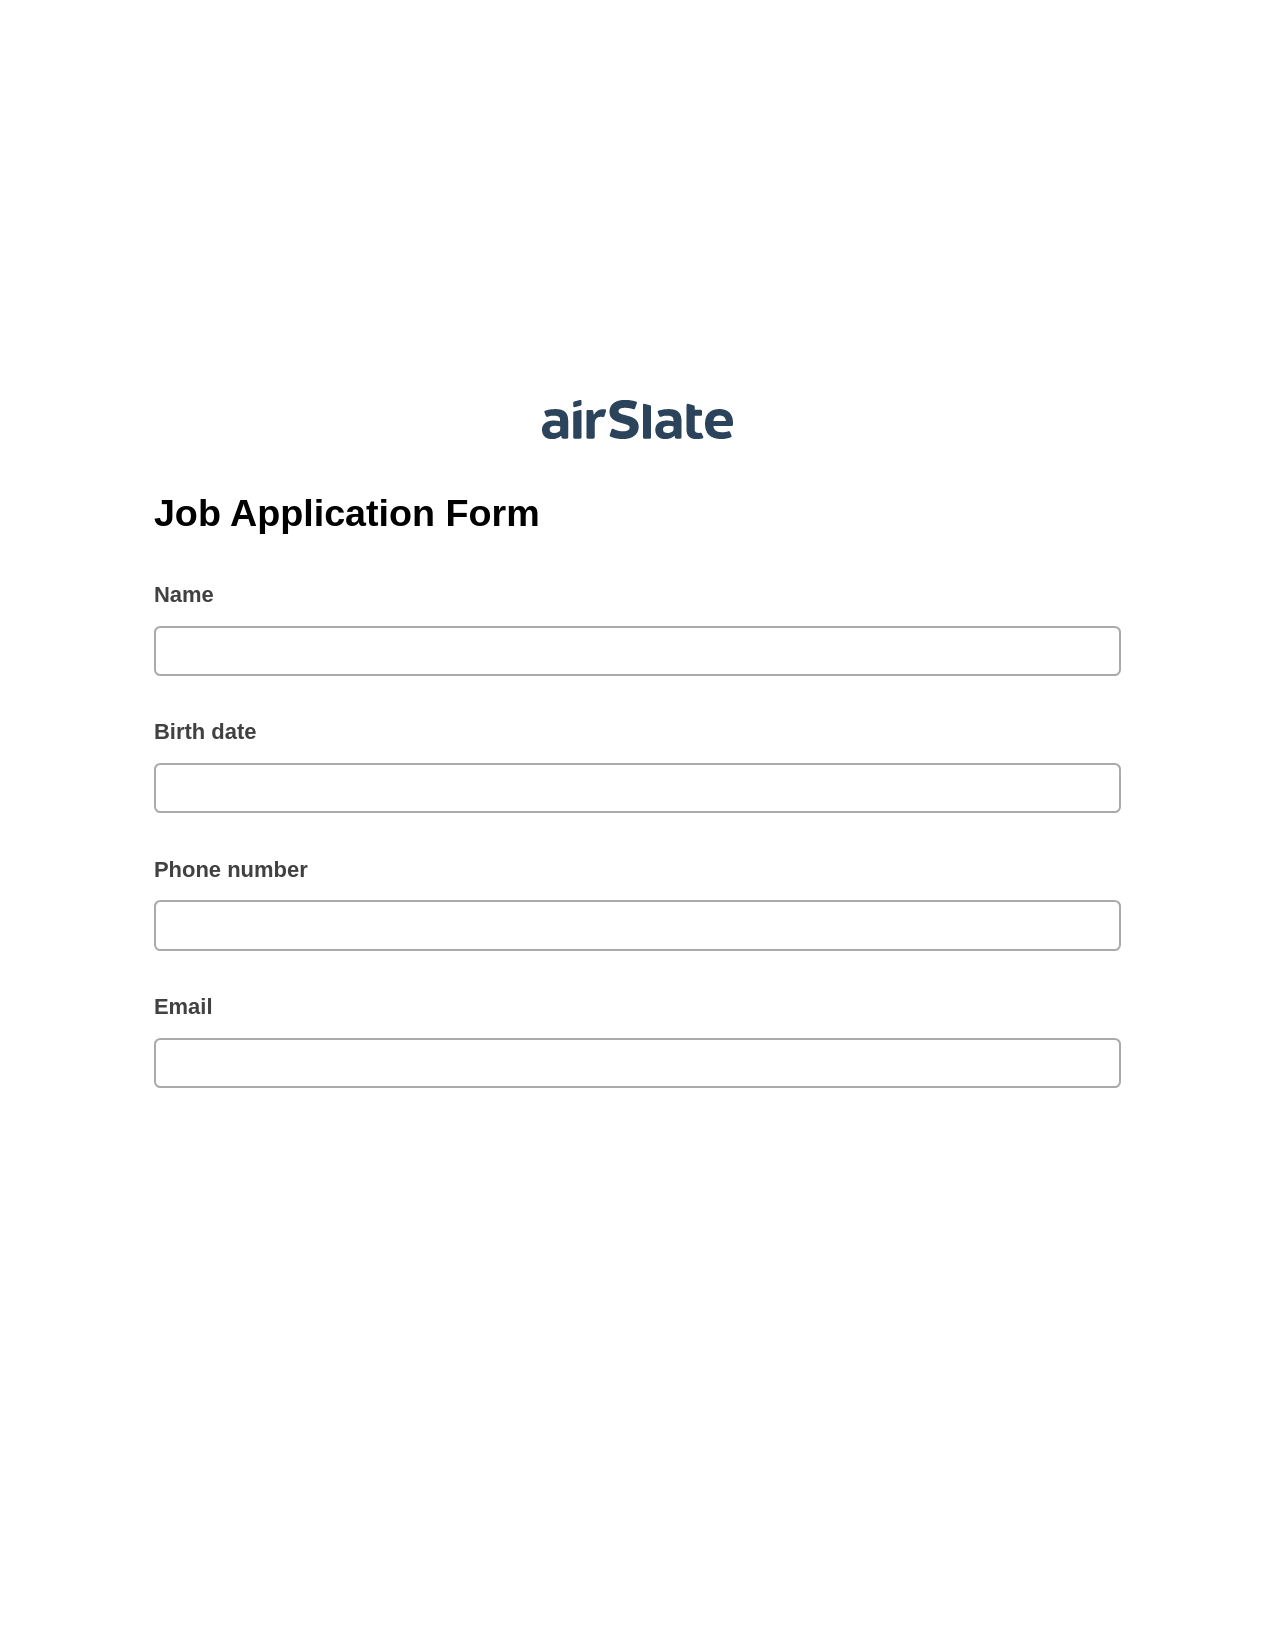 Job Application Form Pre-fill from CSV File Bot, Create Salesforce Record Bot, Post-finish Document Bot